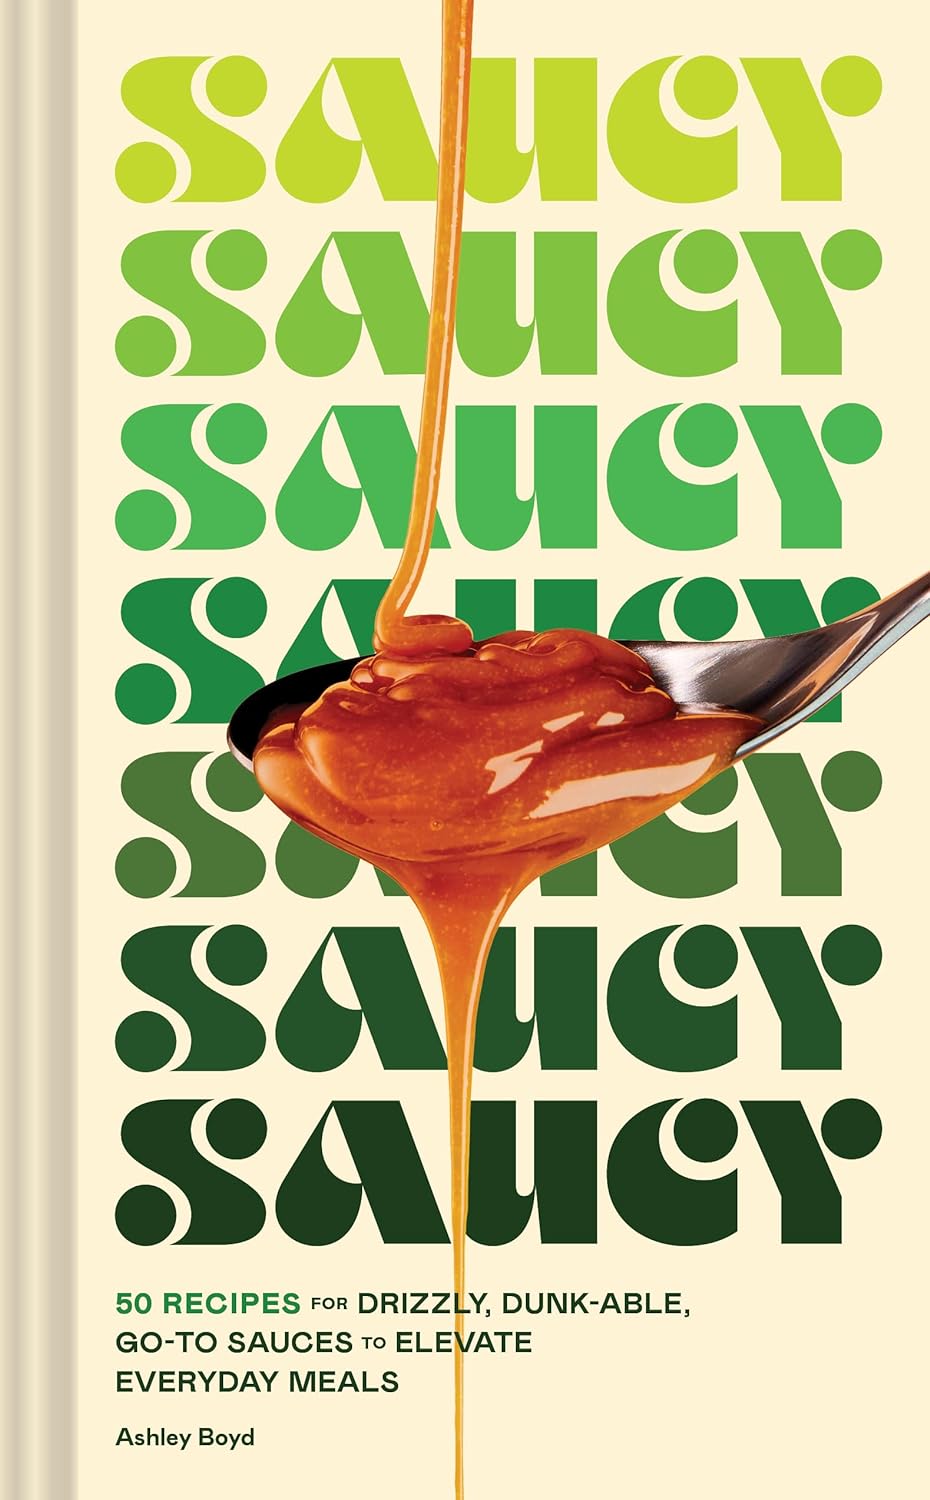 Saucy: 50 Recipes for Drizzly, Dunk-able, Go-To Sauces to Elevate Everyday Meals (Ashley Boyd)